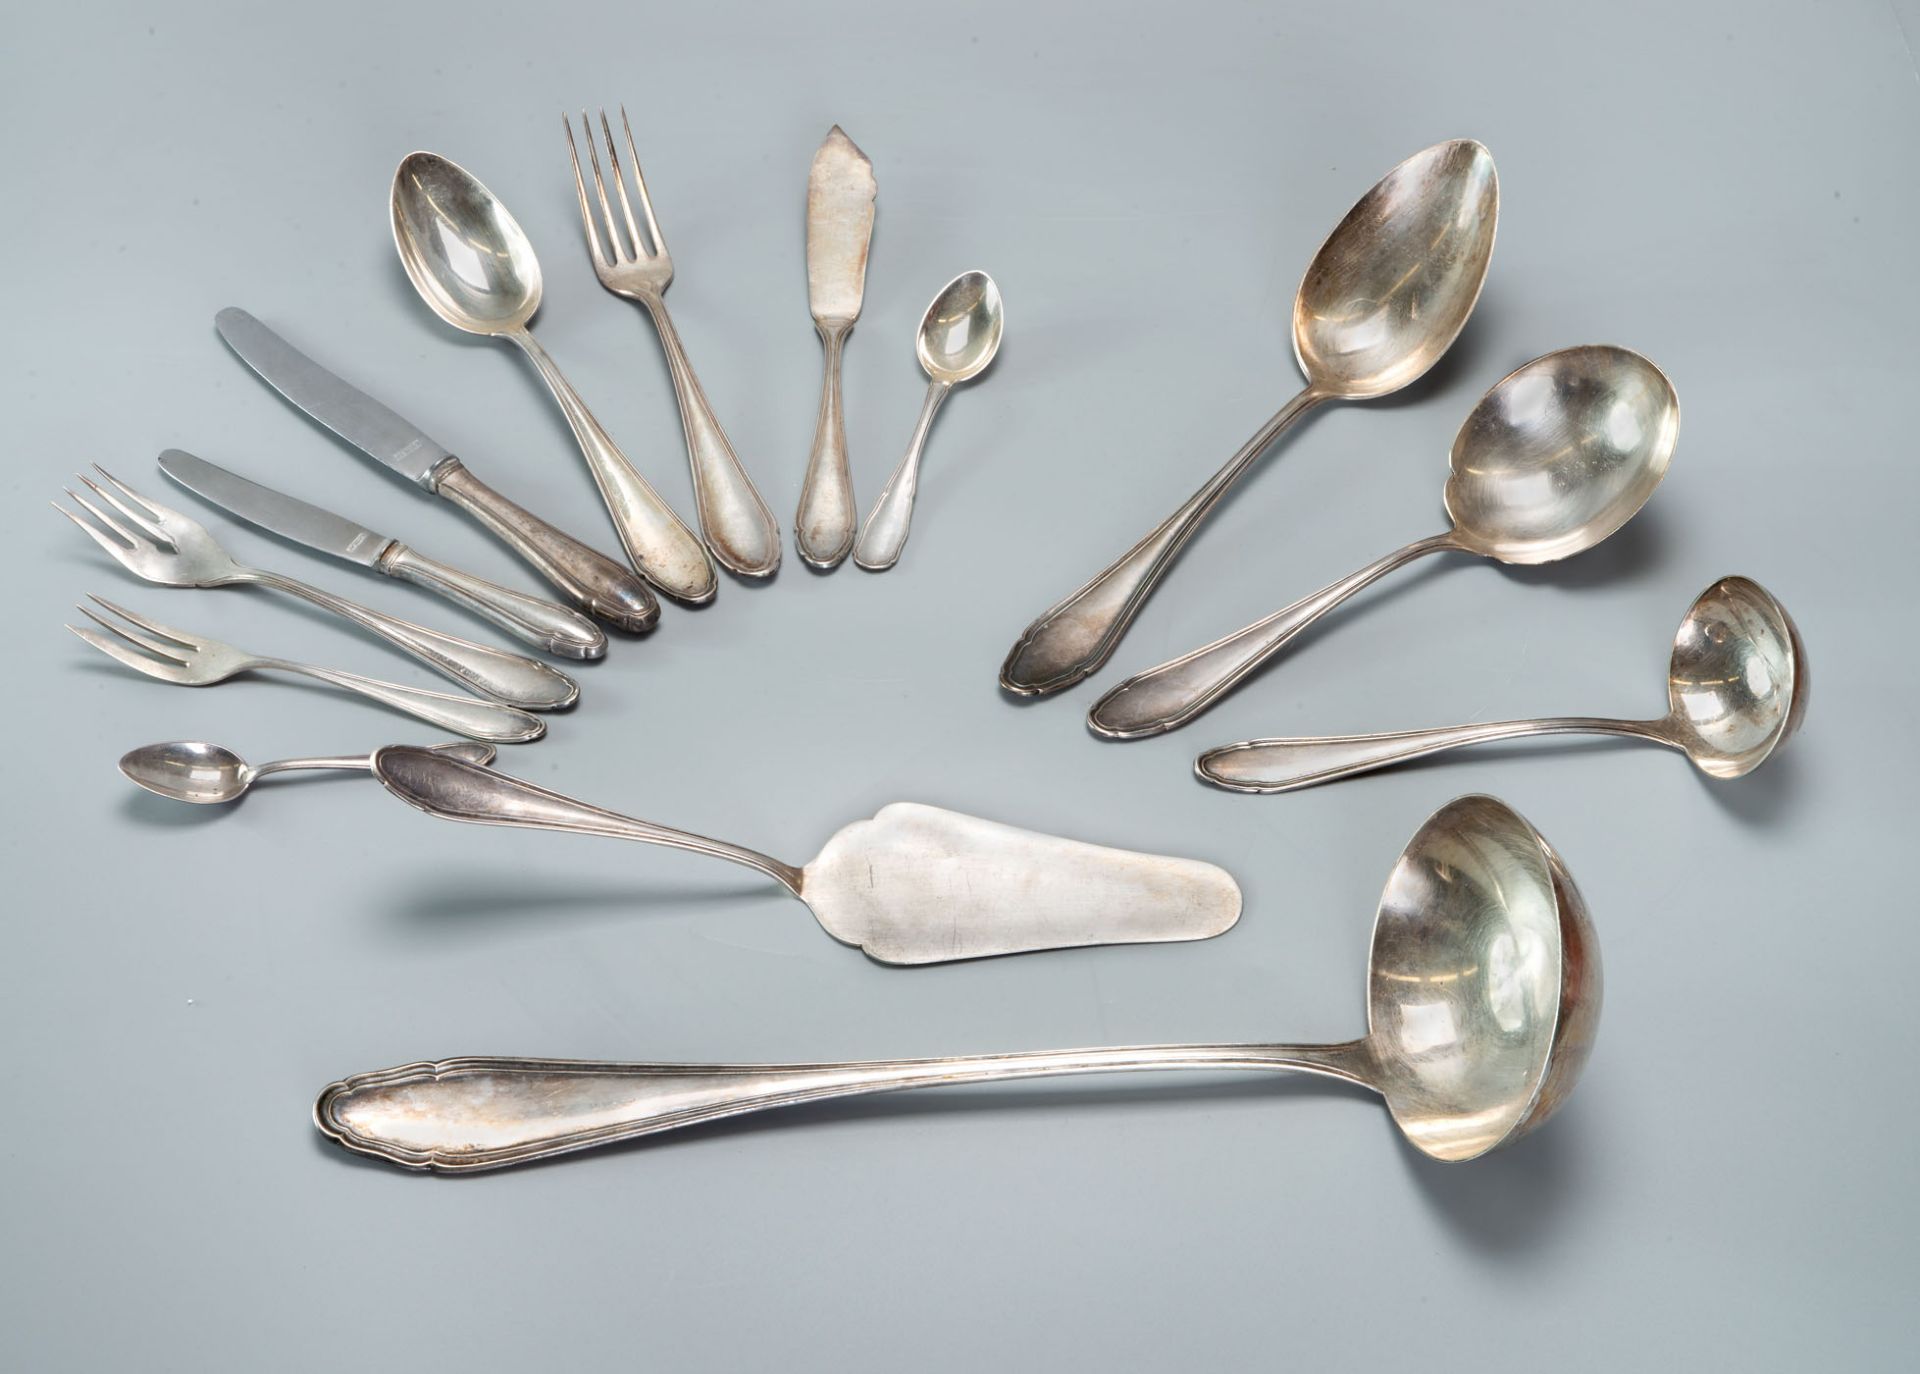 An Art Deco Silver Flatware Set for 12, Germany, Early 20th Century - Bild 2 aus 4